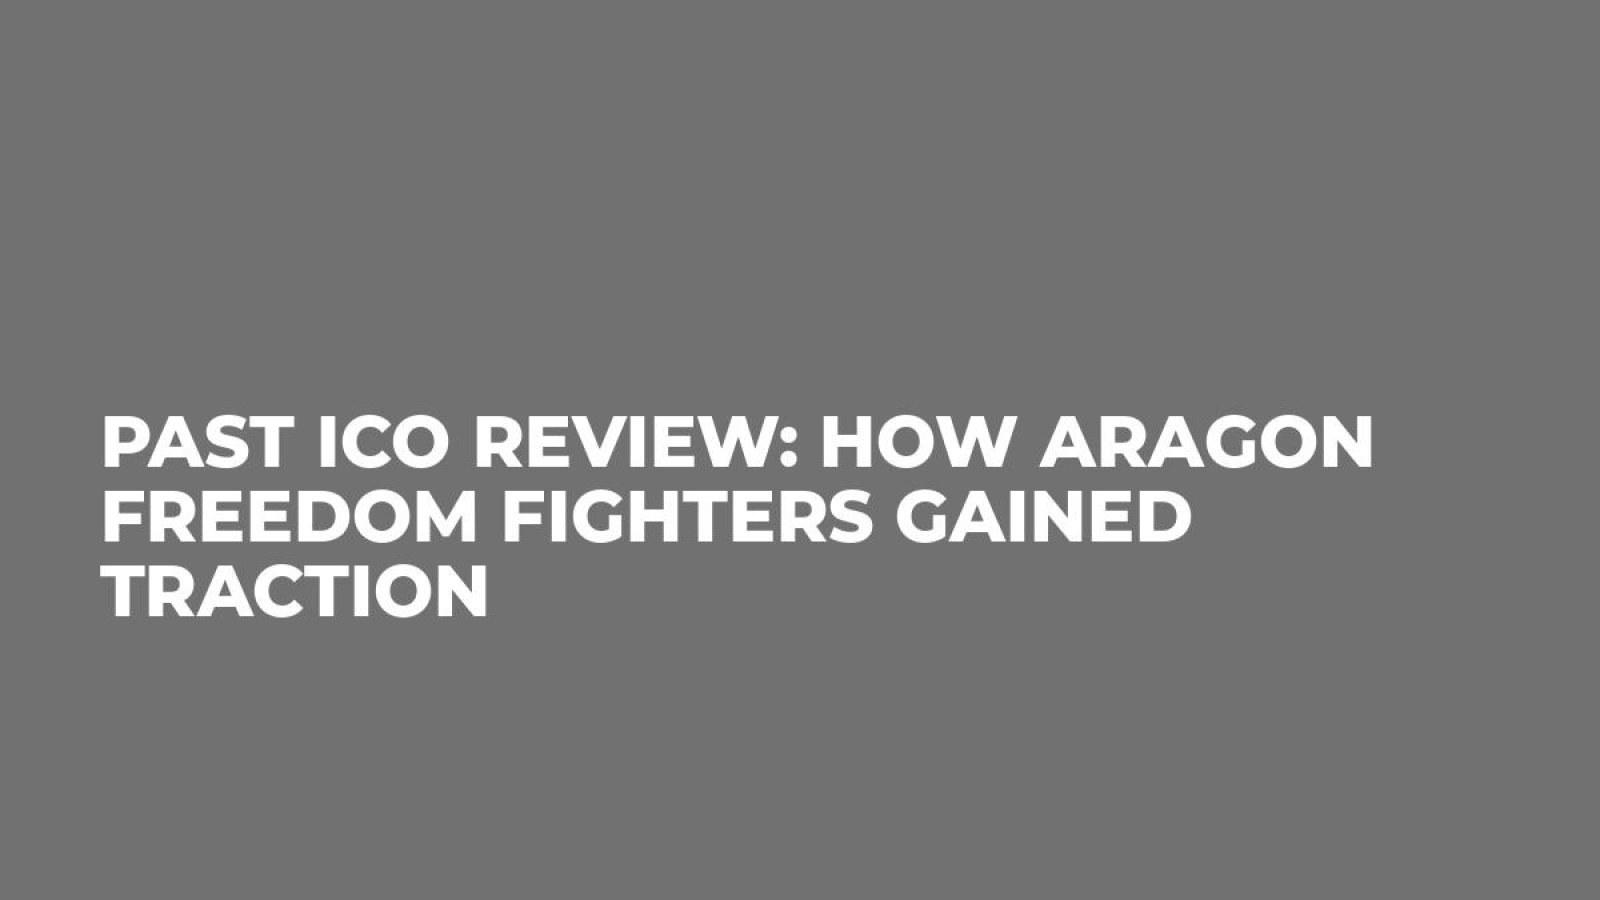 Past ICO Review: How Aragon Freedom Fighters Gained Traction